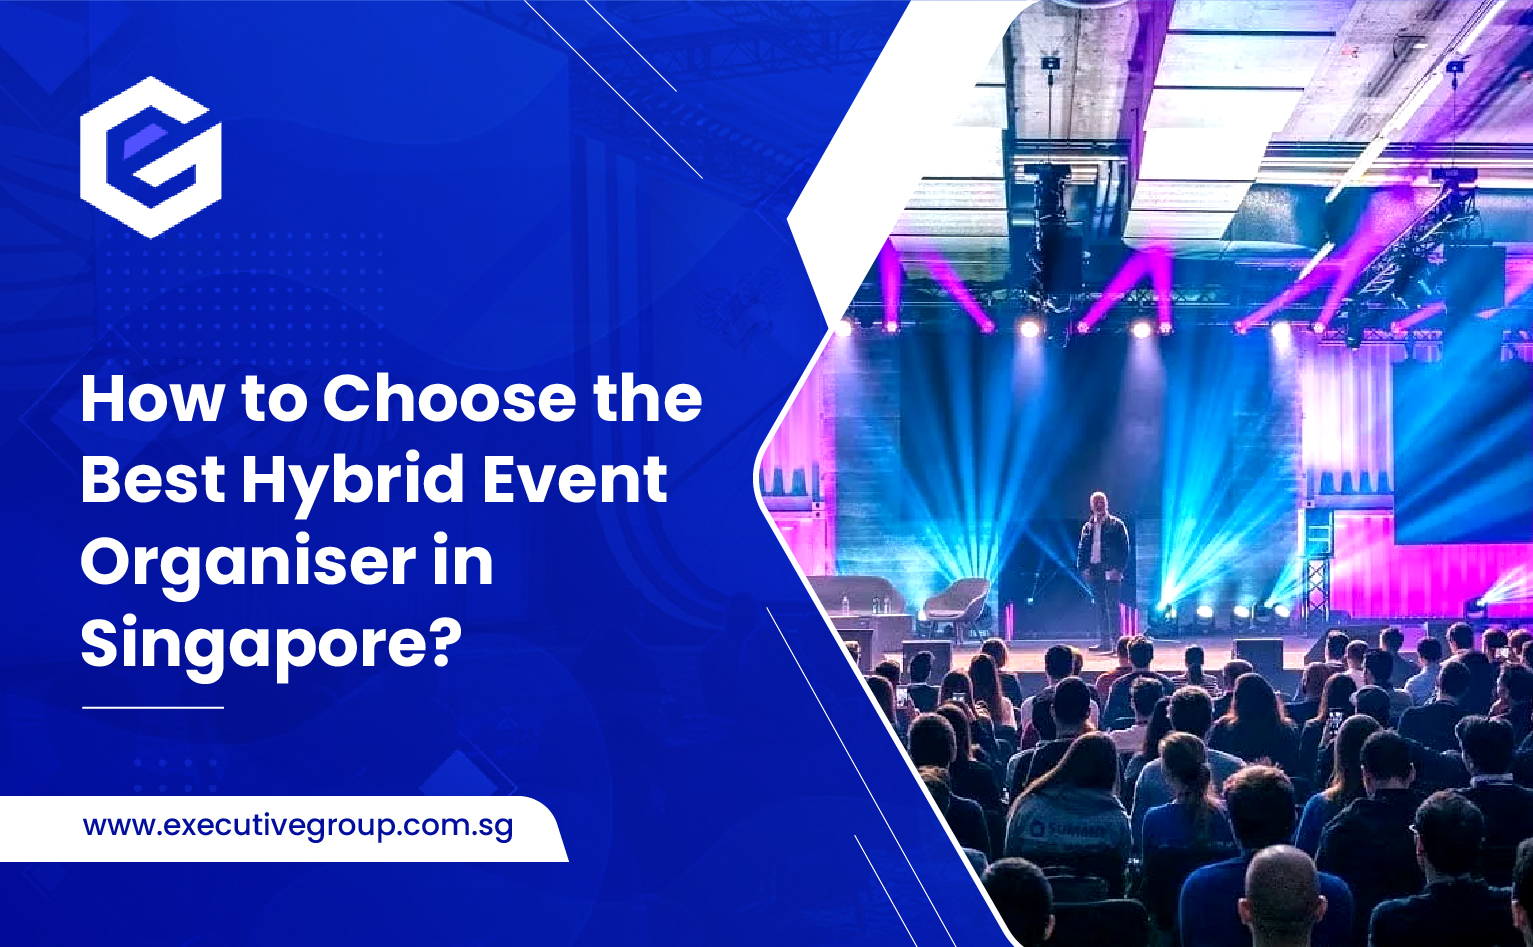 How to Choose the Best Hybrid Event Organiser in Singapore?